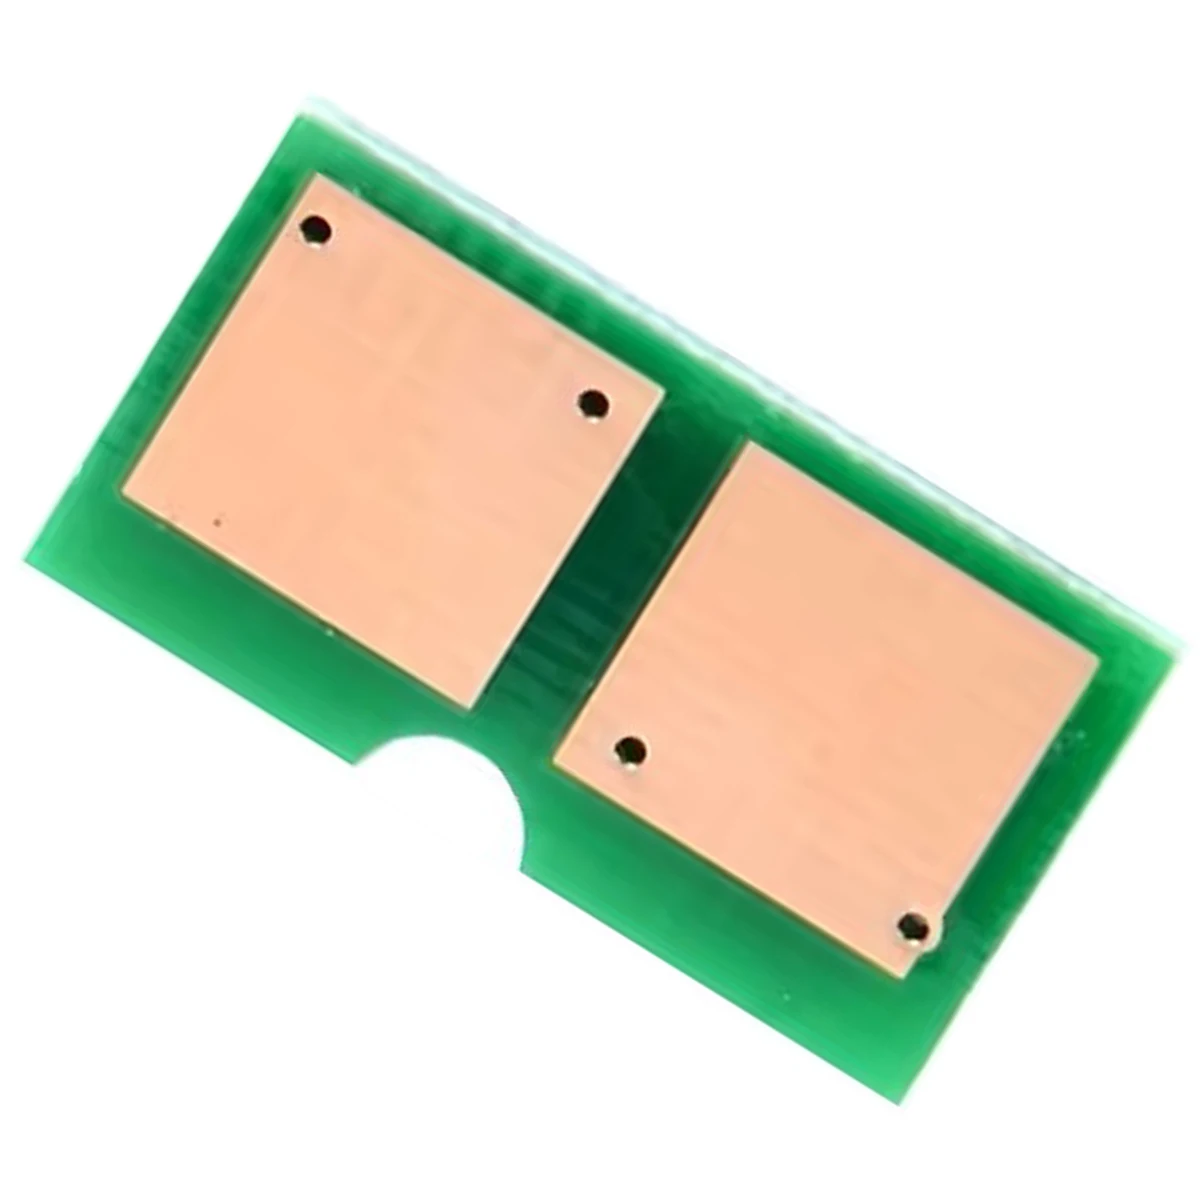 

Image Imaging Unit Drum Chip FOR Canon IR ImageRunner IR C 2550 IR C 2880 IR C 3080 IR C 3380 IR C 3480 IR C 3580 i F N